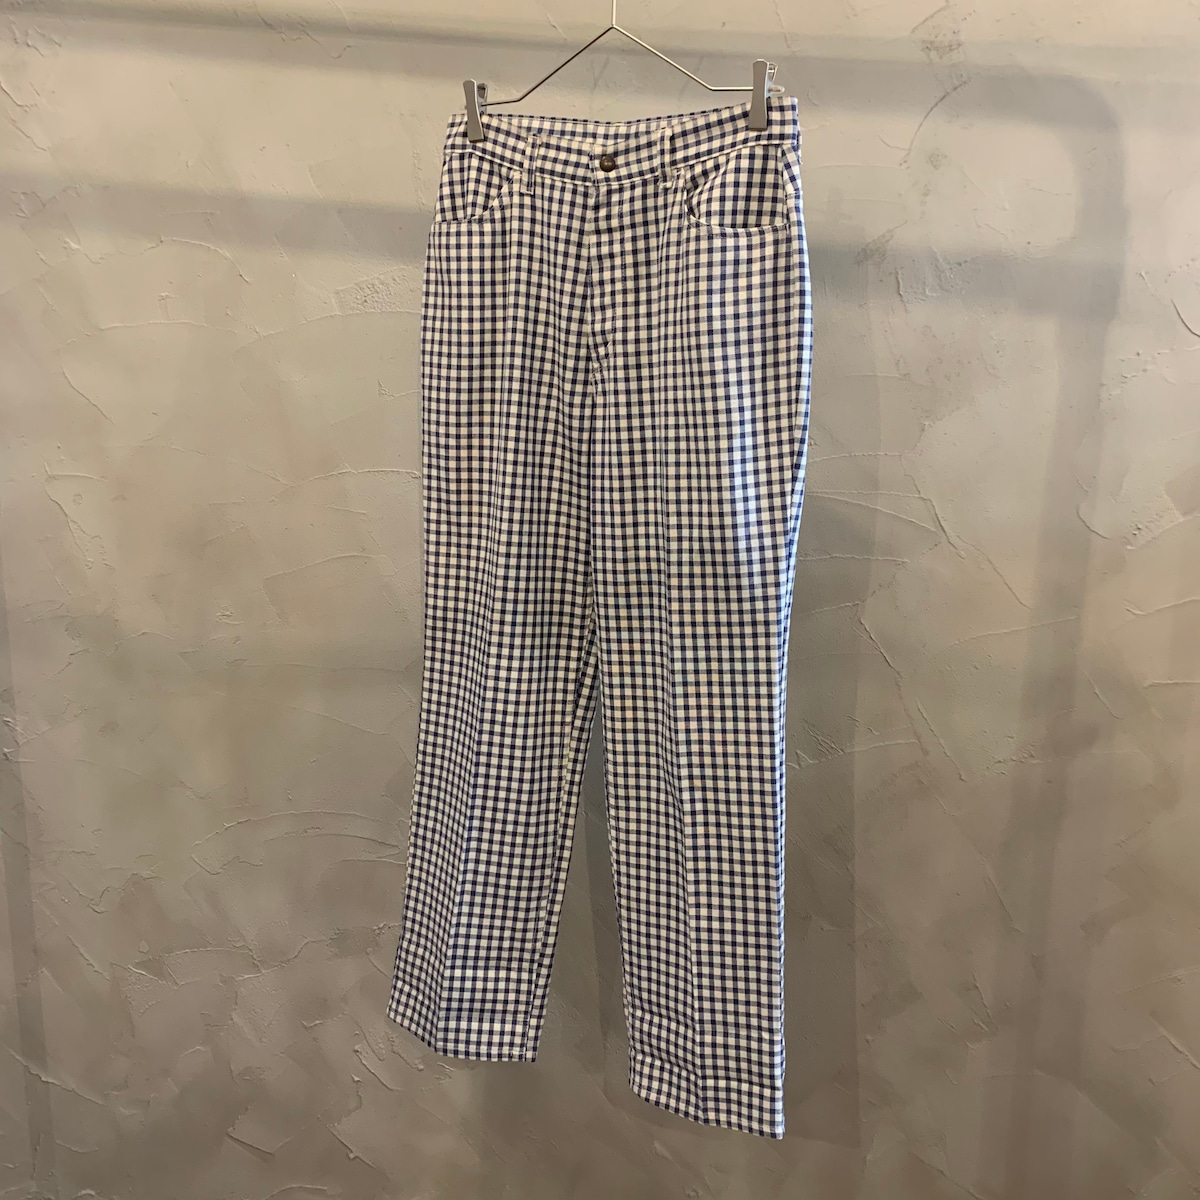 Levi's for gals STA-PREST / gingham check pants / 70's | ROOM